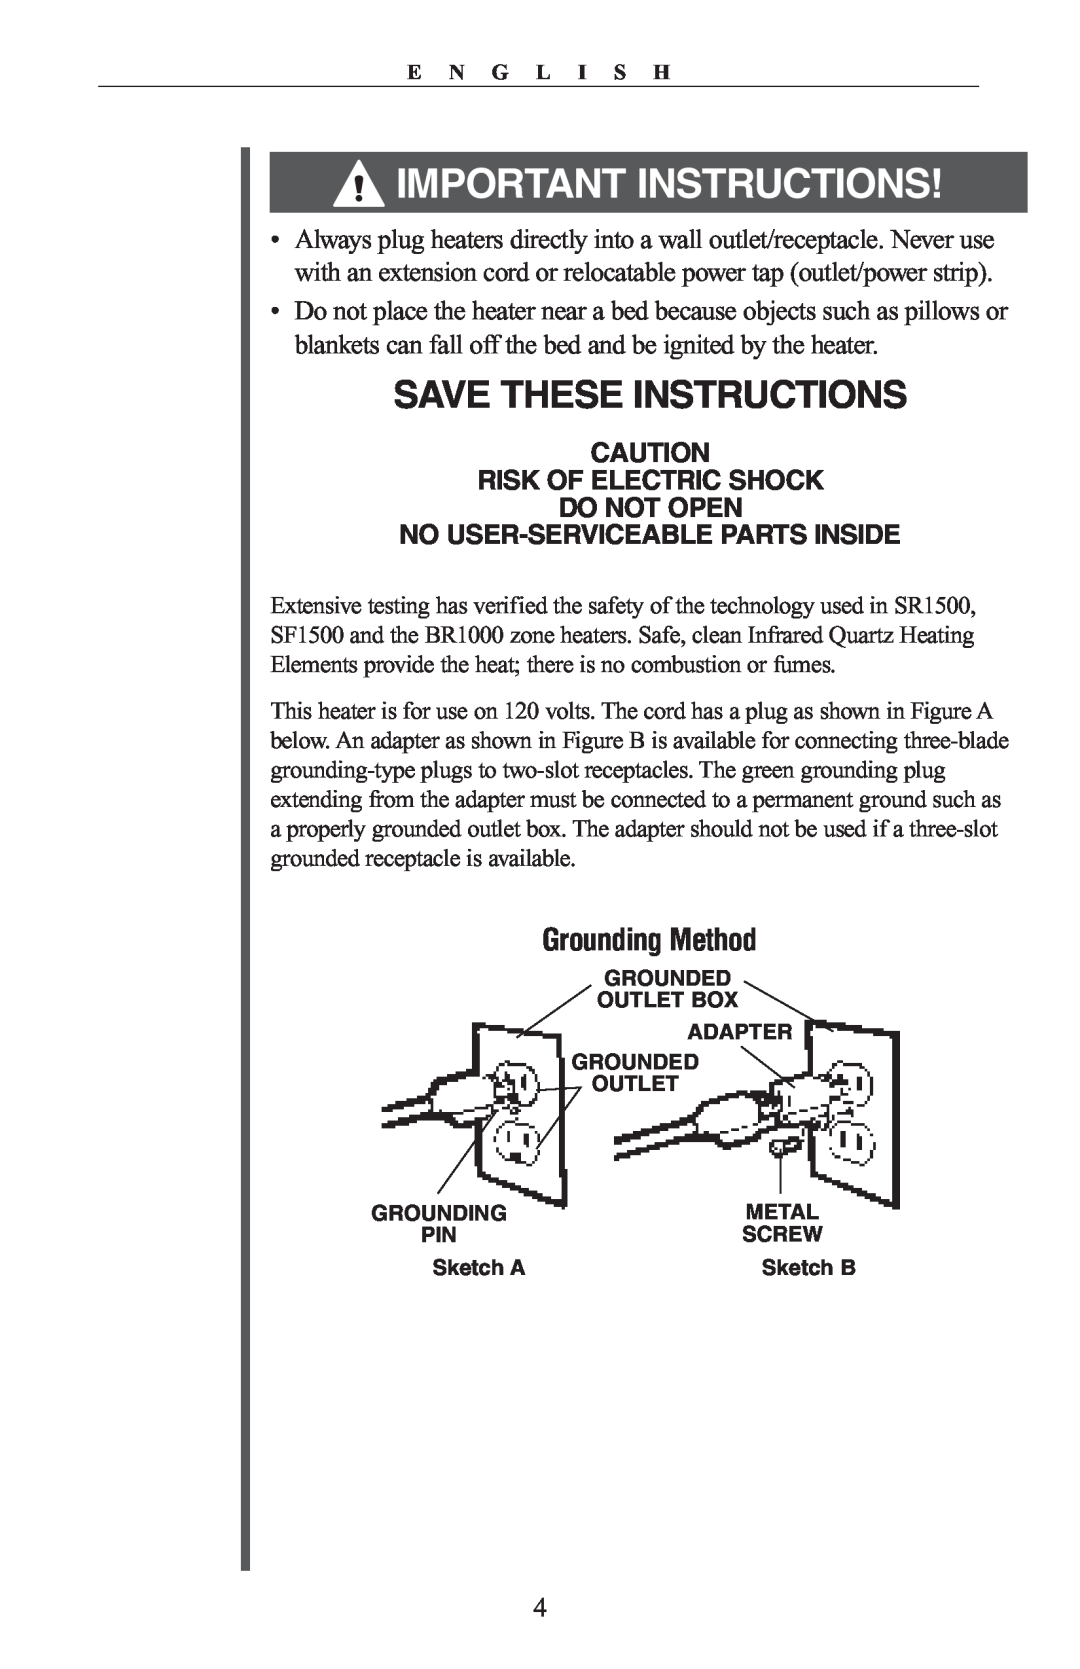 Oreck BR1000, SF1500 Save These Instructions, Grounding Method, Risk Of Electric Shock Do Not Open, Important Instructions 